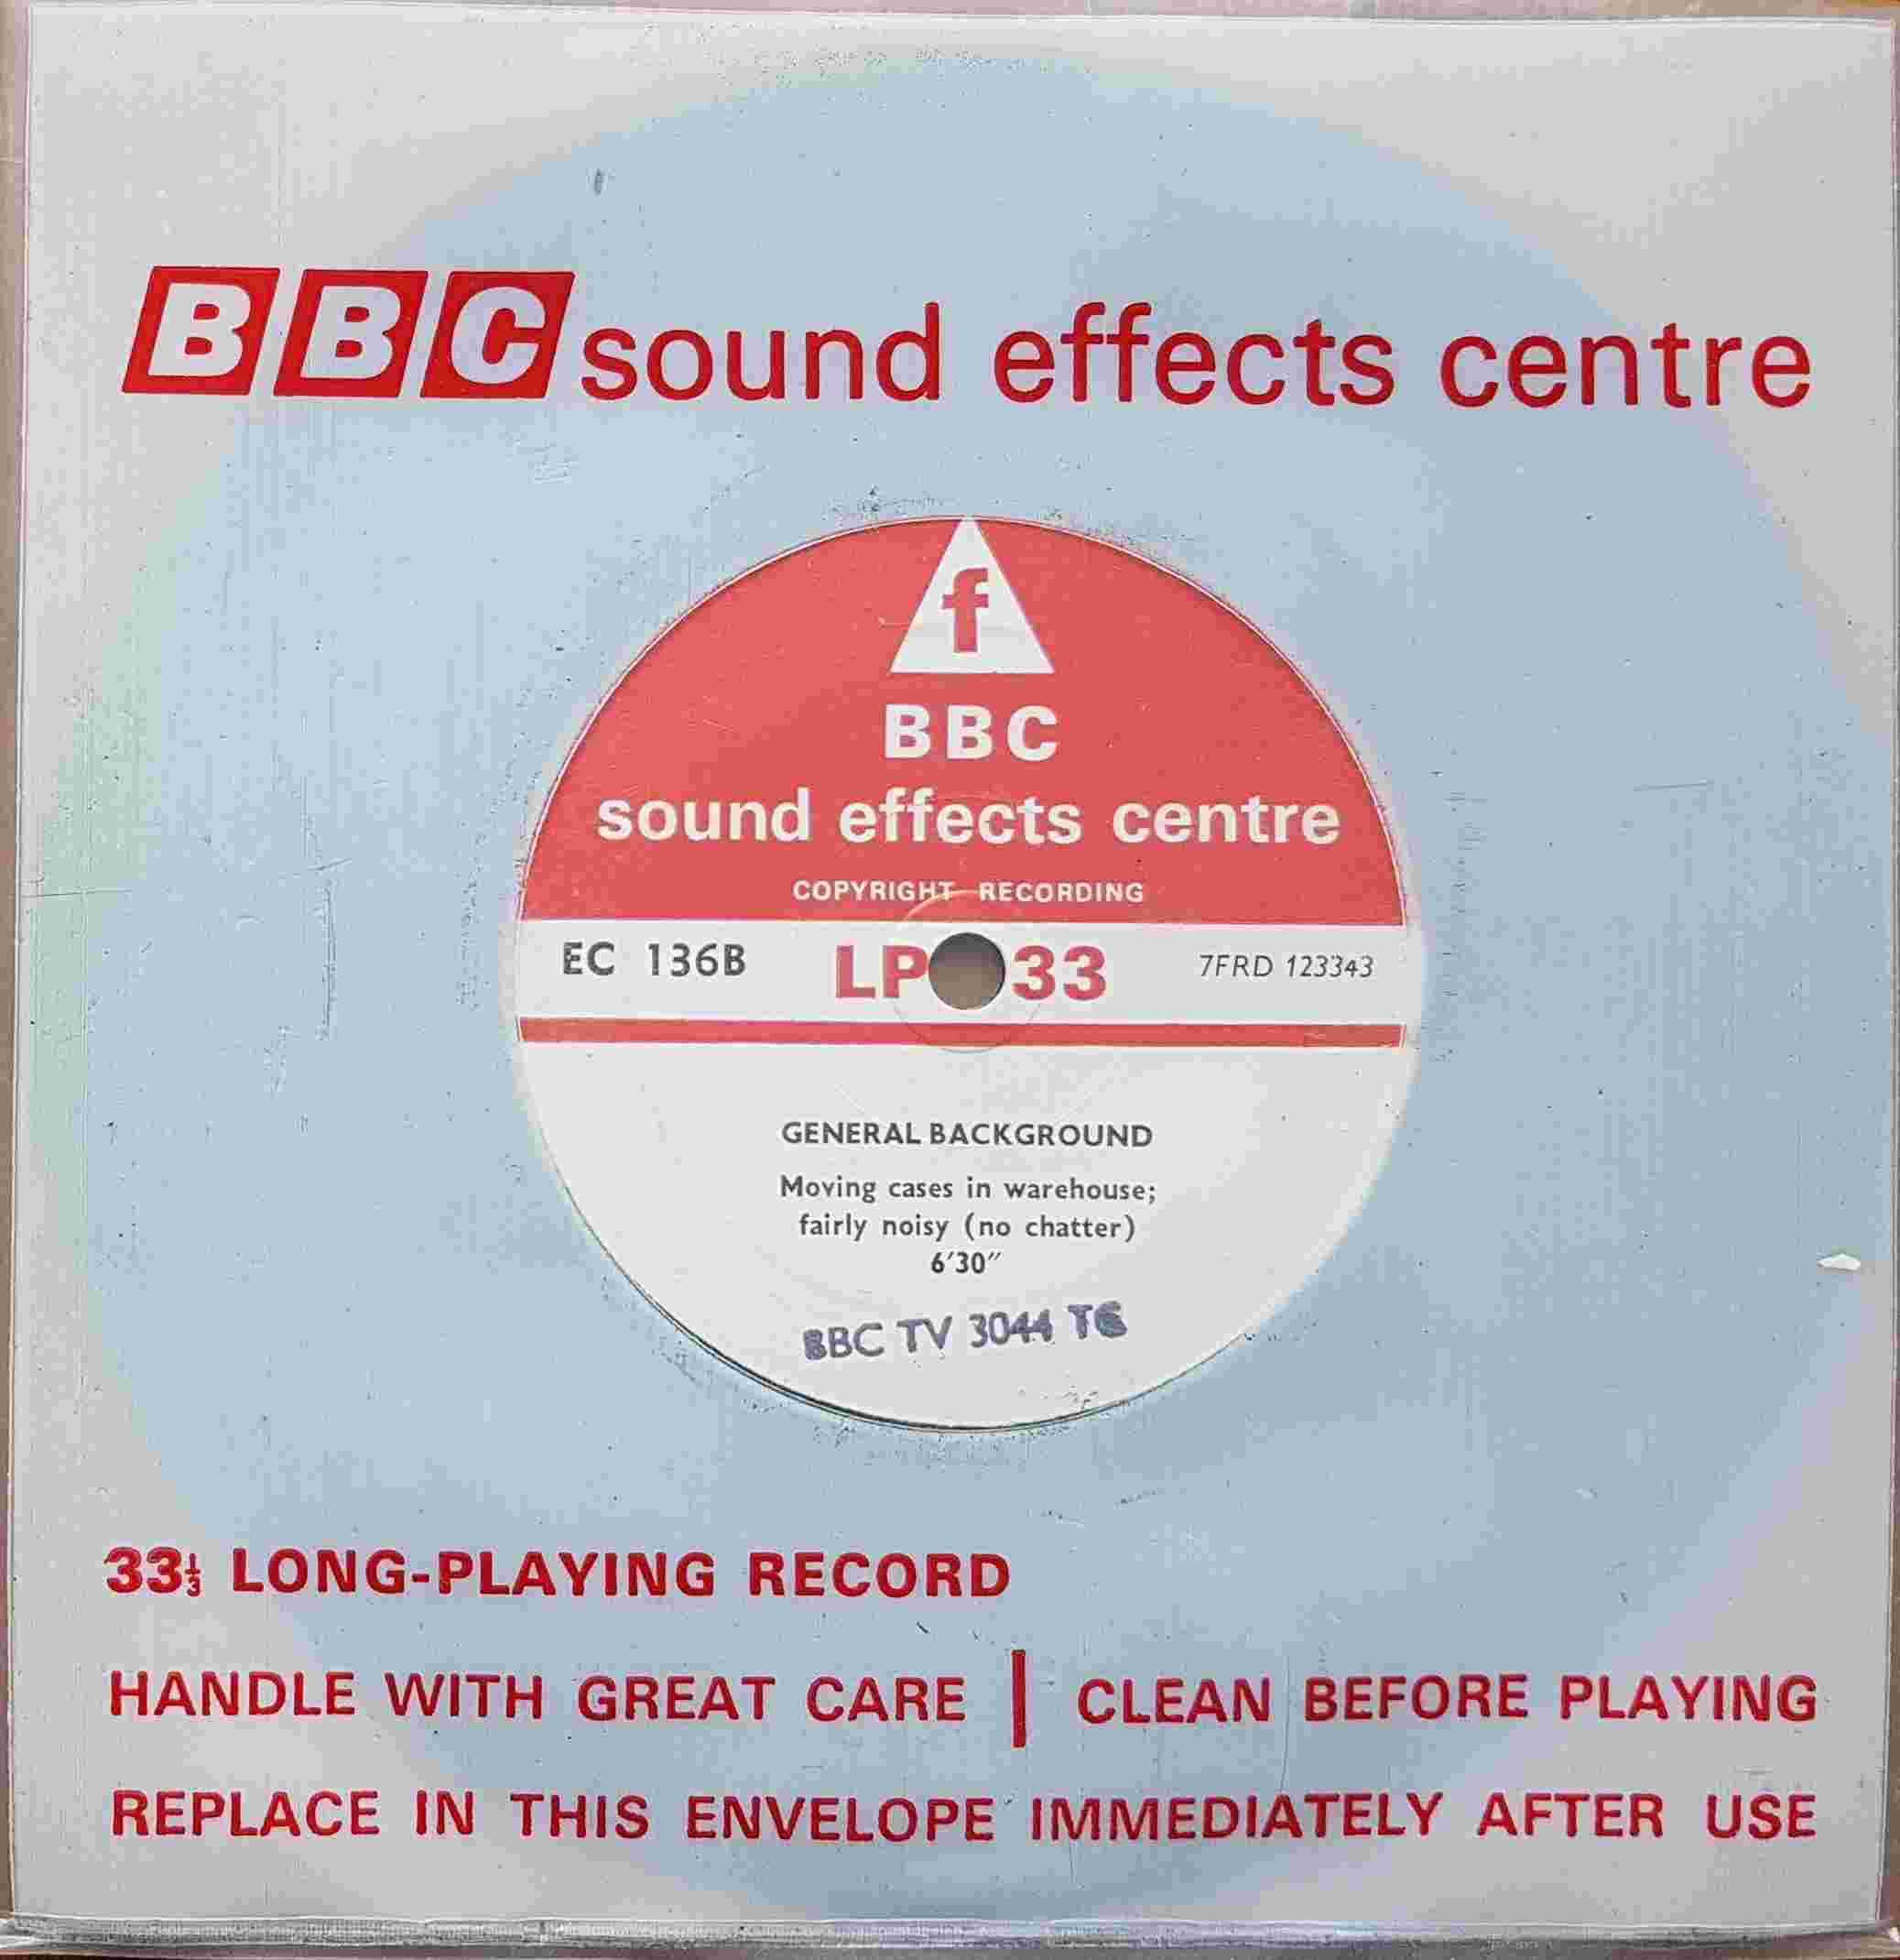 Picture of EC 136B General background by artist Not registered from the BBC singles - Records and Tapes library